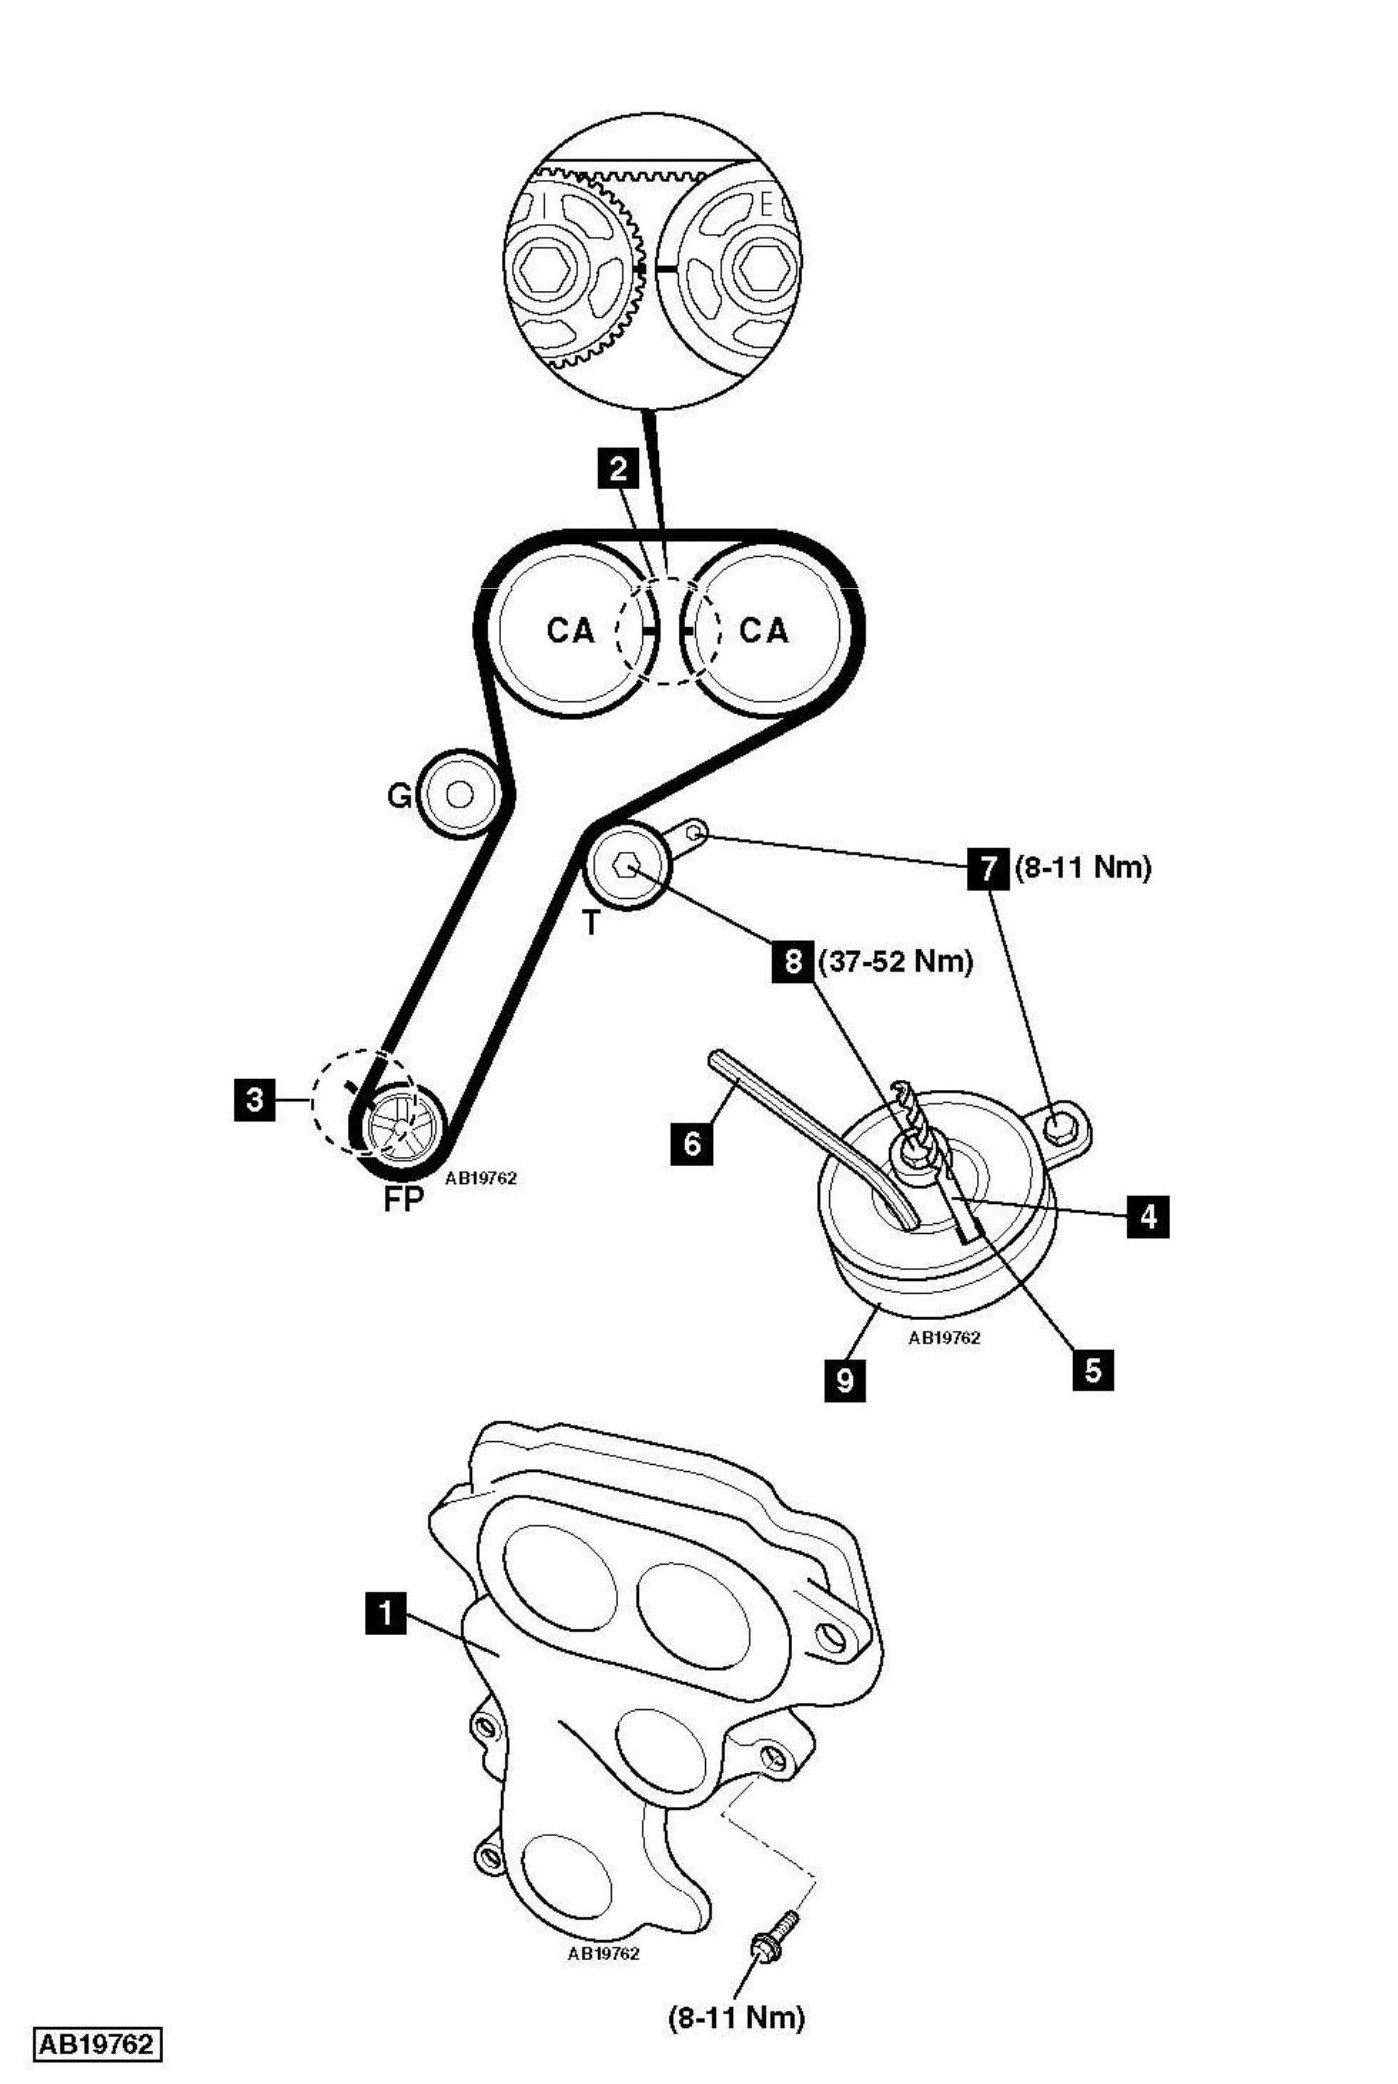 Port Timing Diagram Of Diesel Engine Engine Valve Timing Diagram to Replace Timing Belt ford Ranger 3 Of Port Timing Diagram Of Diesel Engine